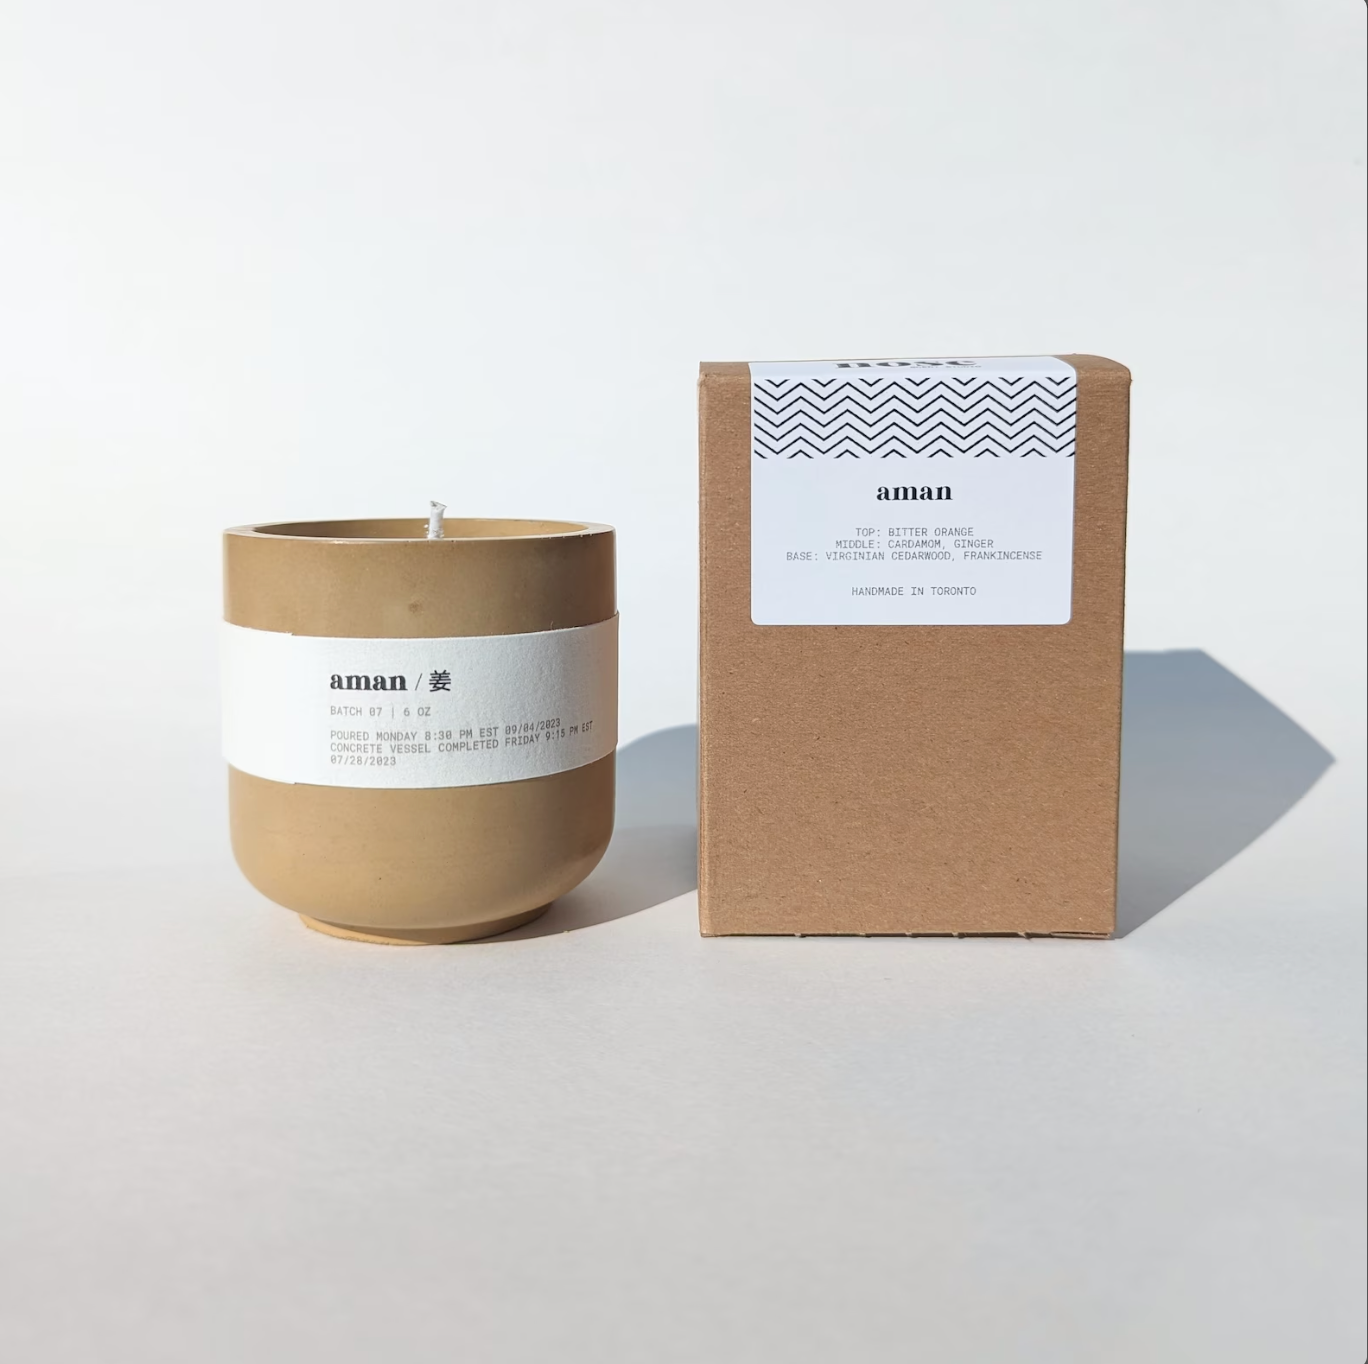 Aman - Cardamom & Ginger Essential Oil Soy Candle